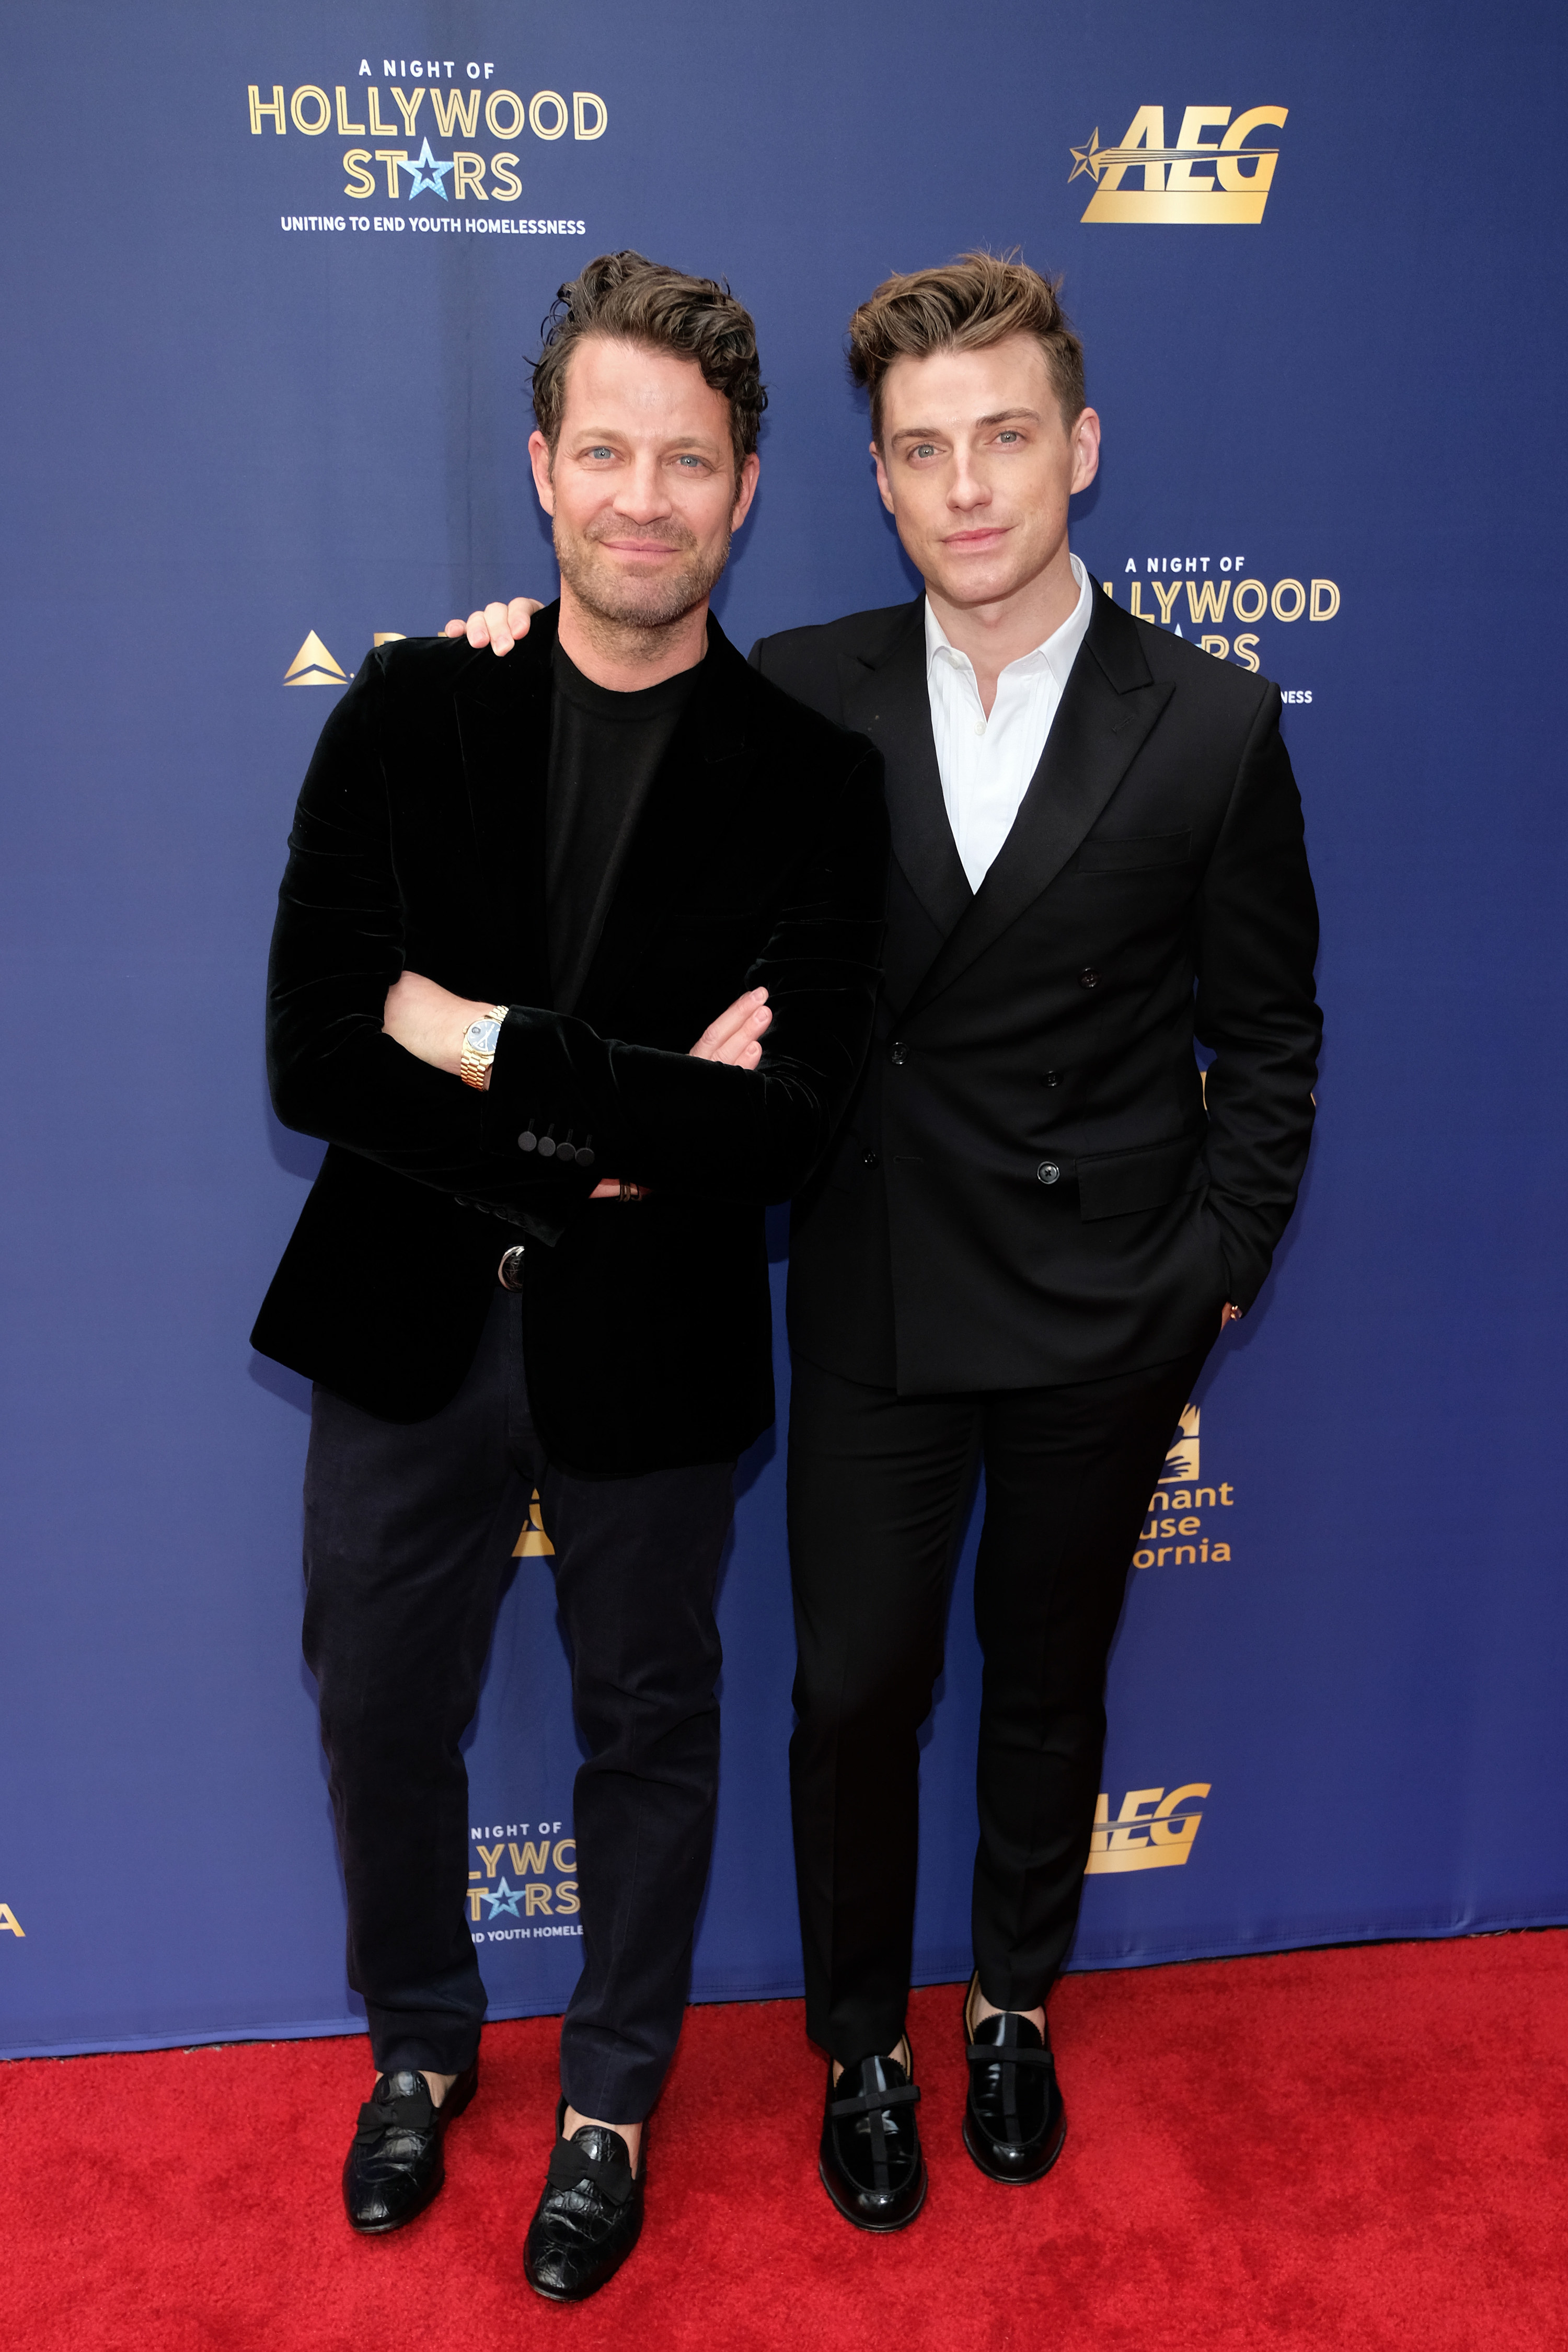 Nate Berkus and Jeremiah Brent on the red carpet